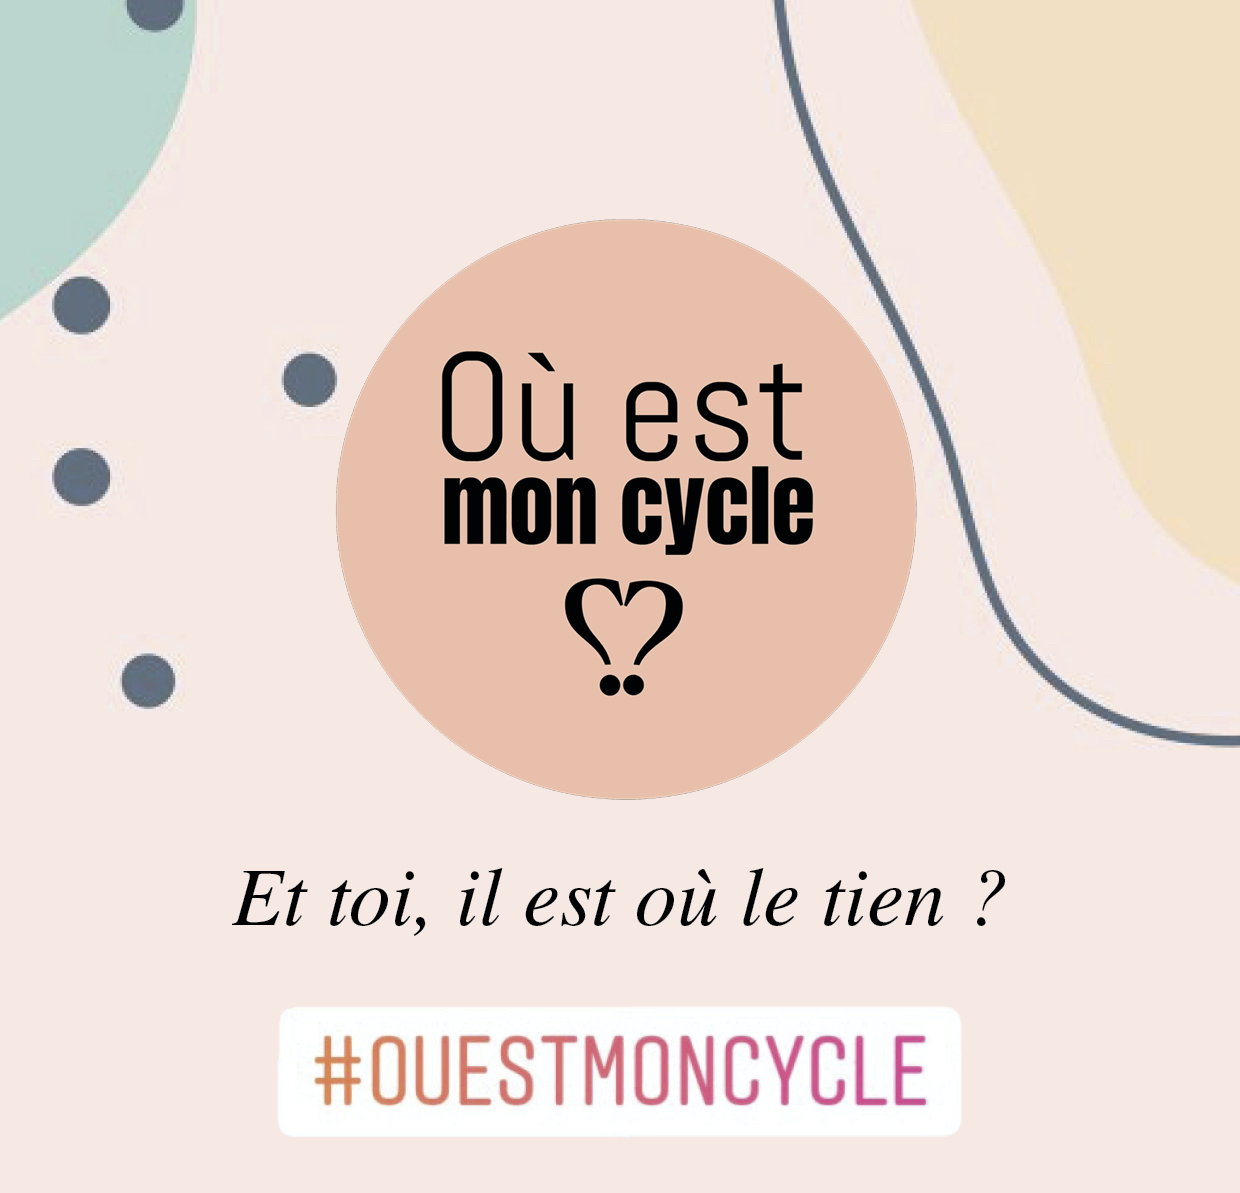 Ouestmoncycle-article